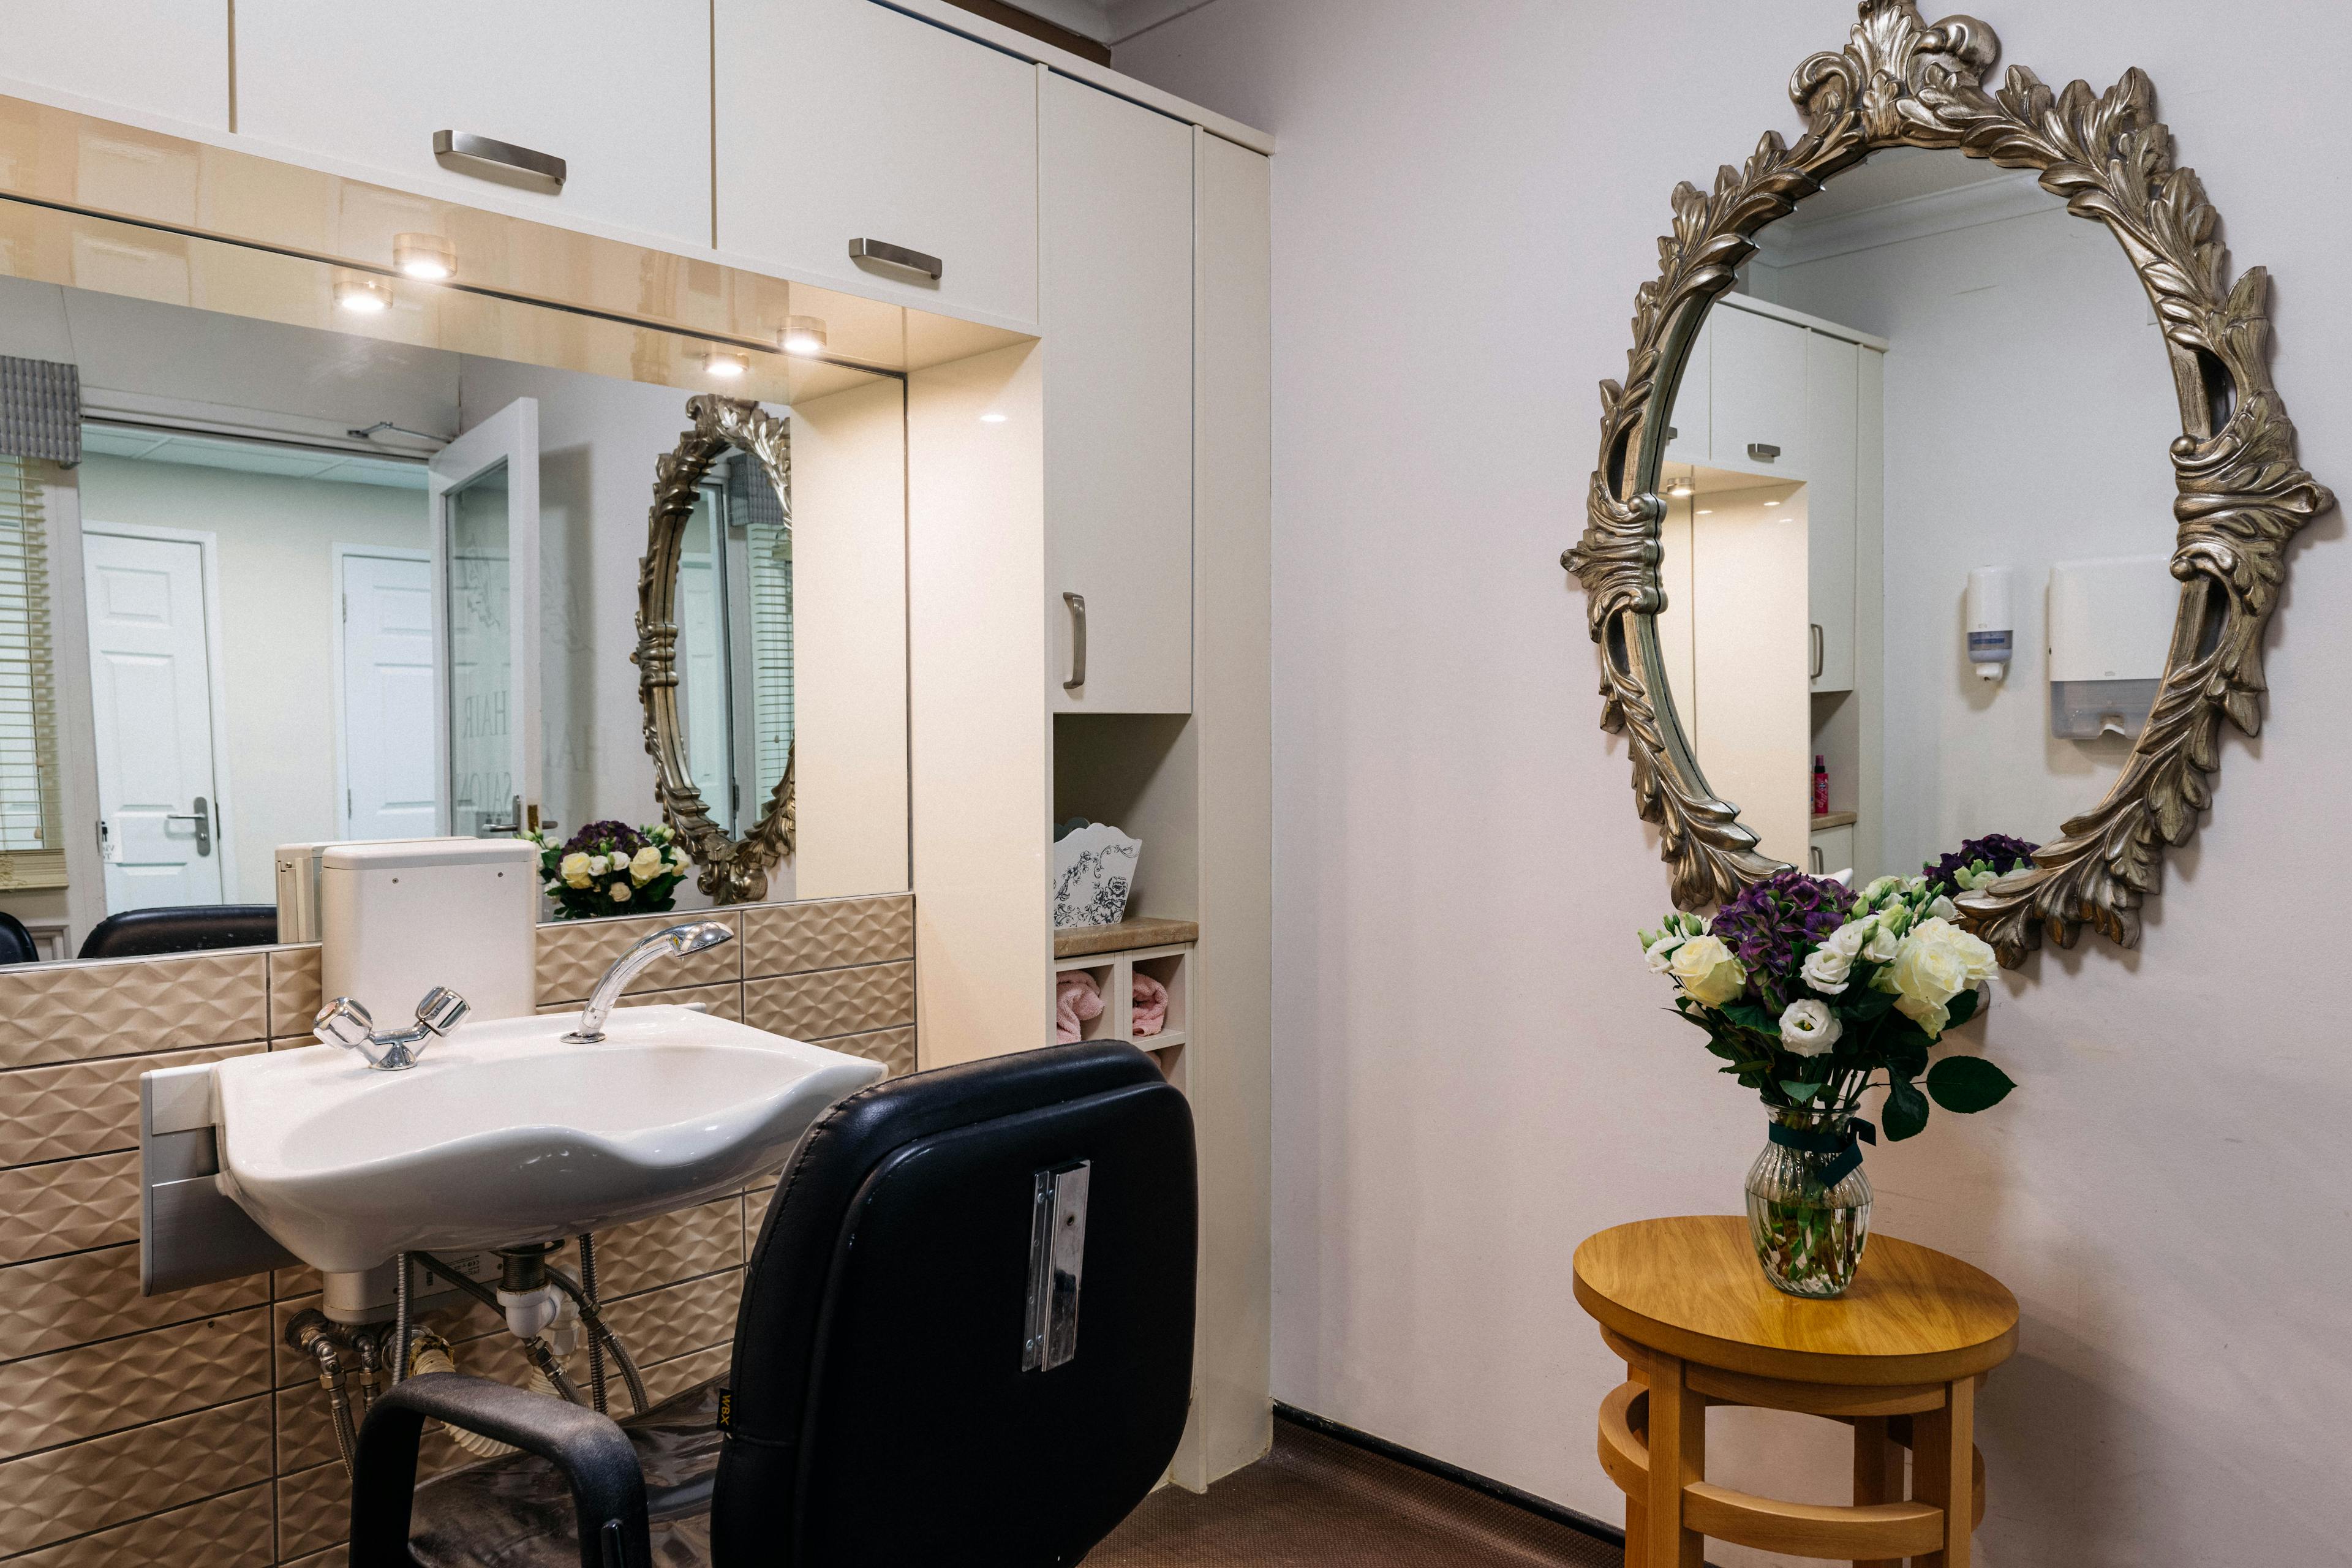 Salon at Lynde House Care Home in Twickenham, Richmond Upon Thames